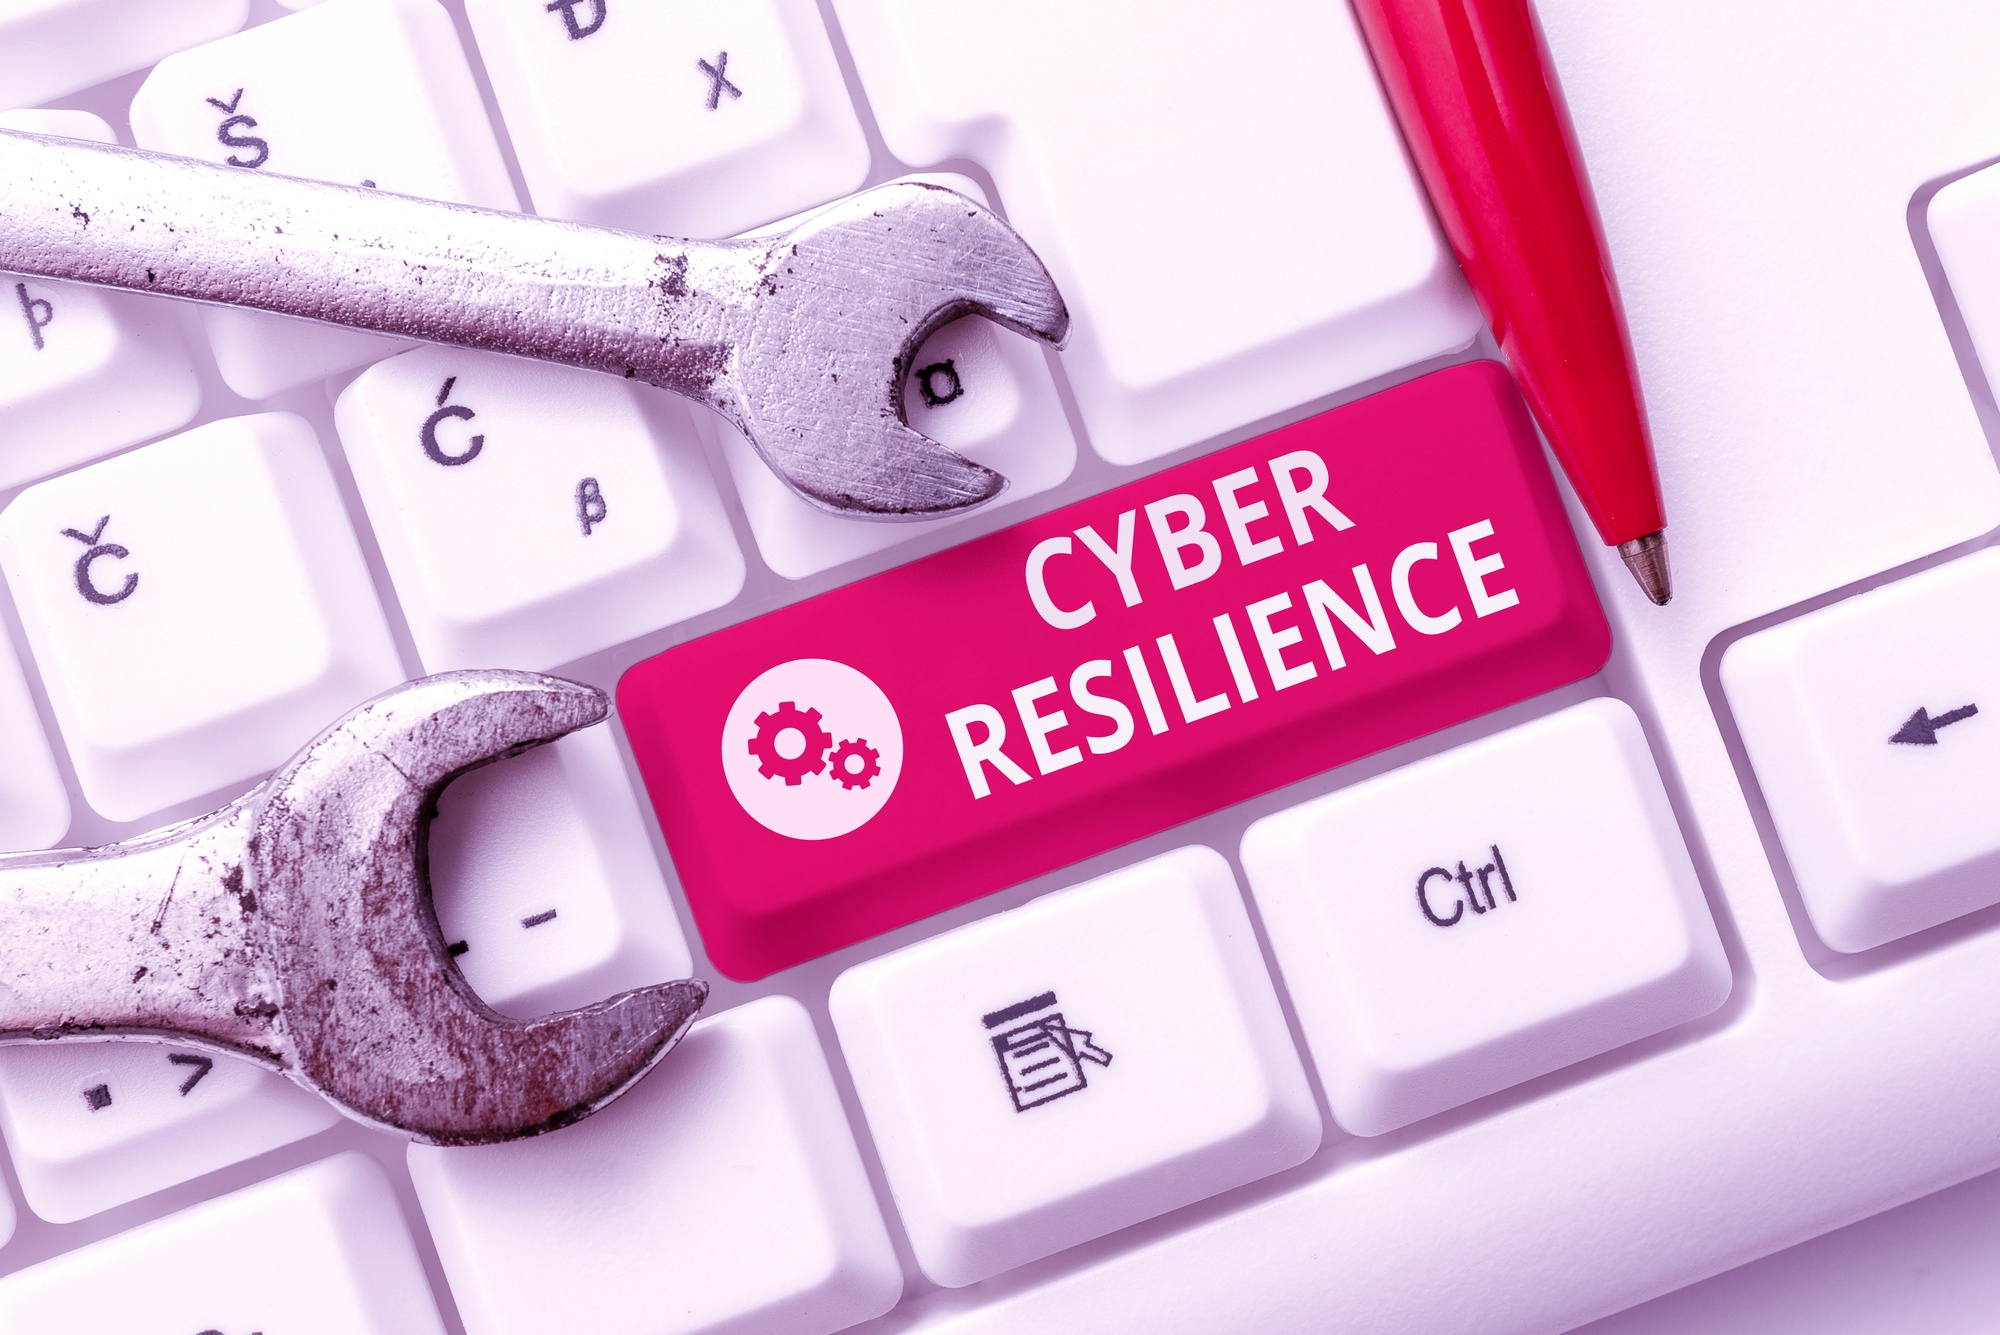 Don’t Mistake Cyber Resiliency for Cyber Security